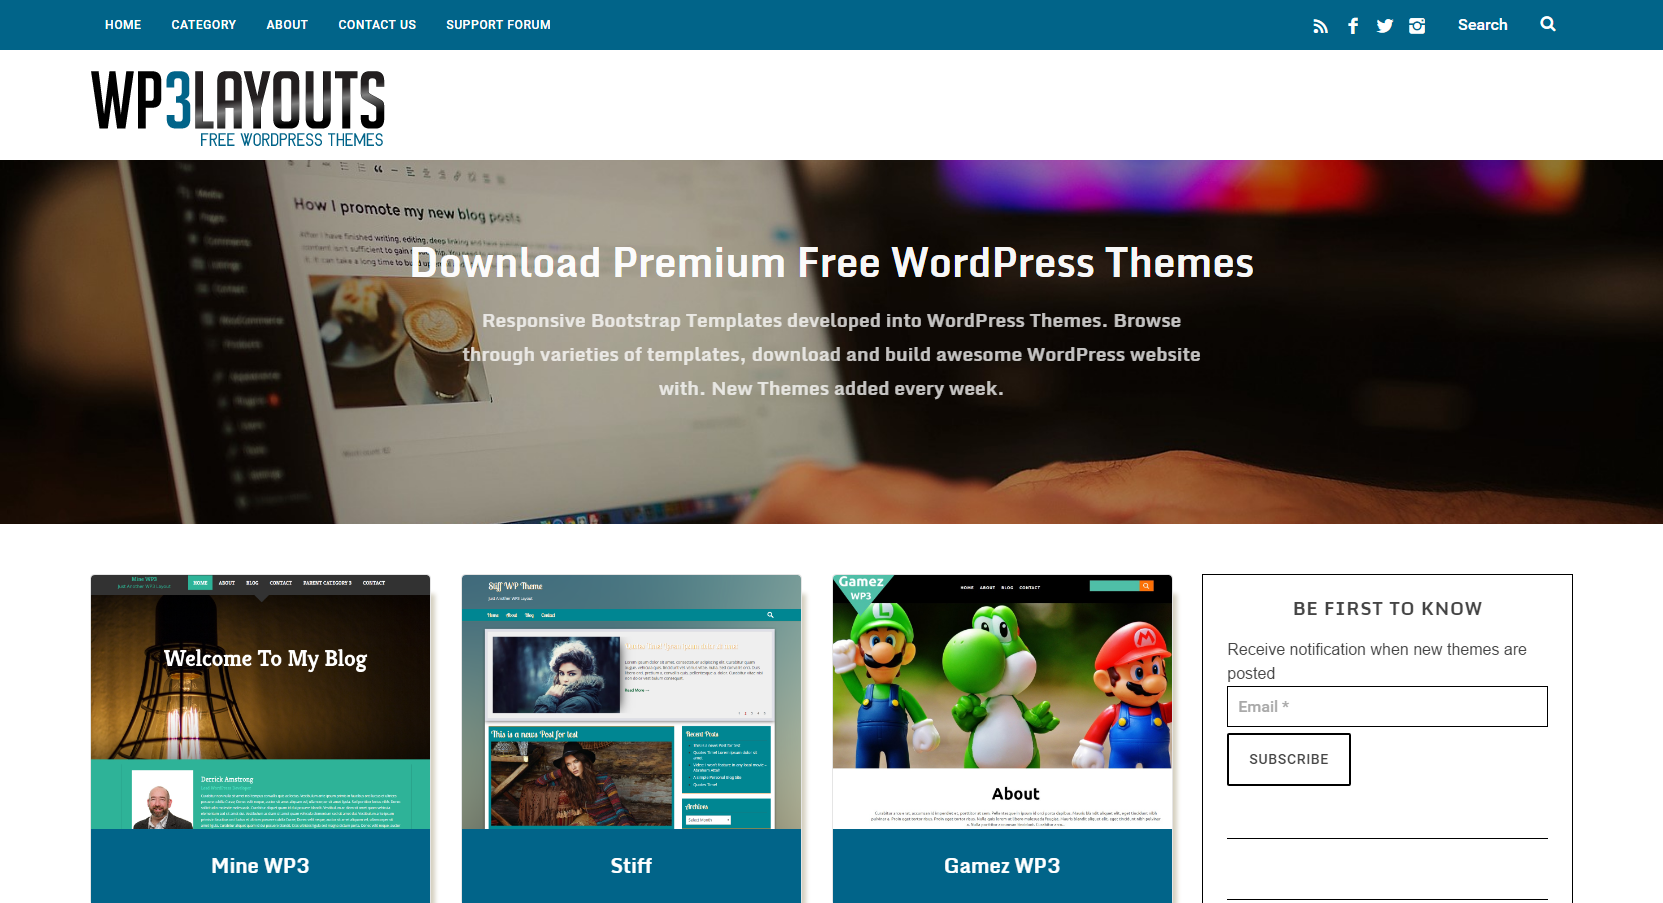 Instant download free WordPress Themes developed from static responsive HTML templates